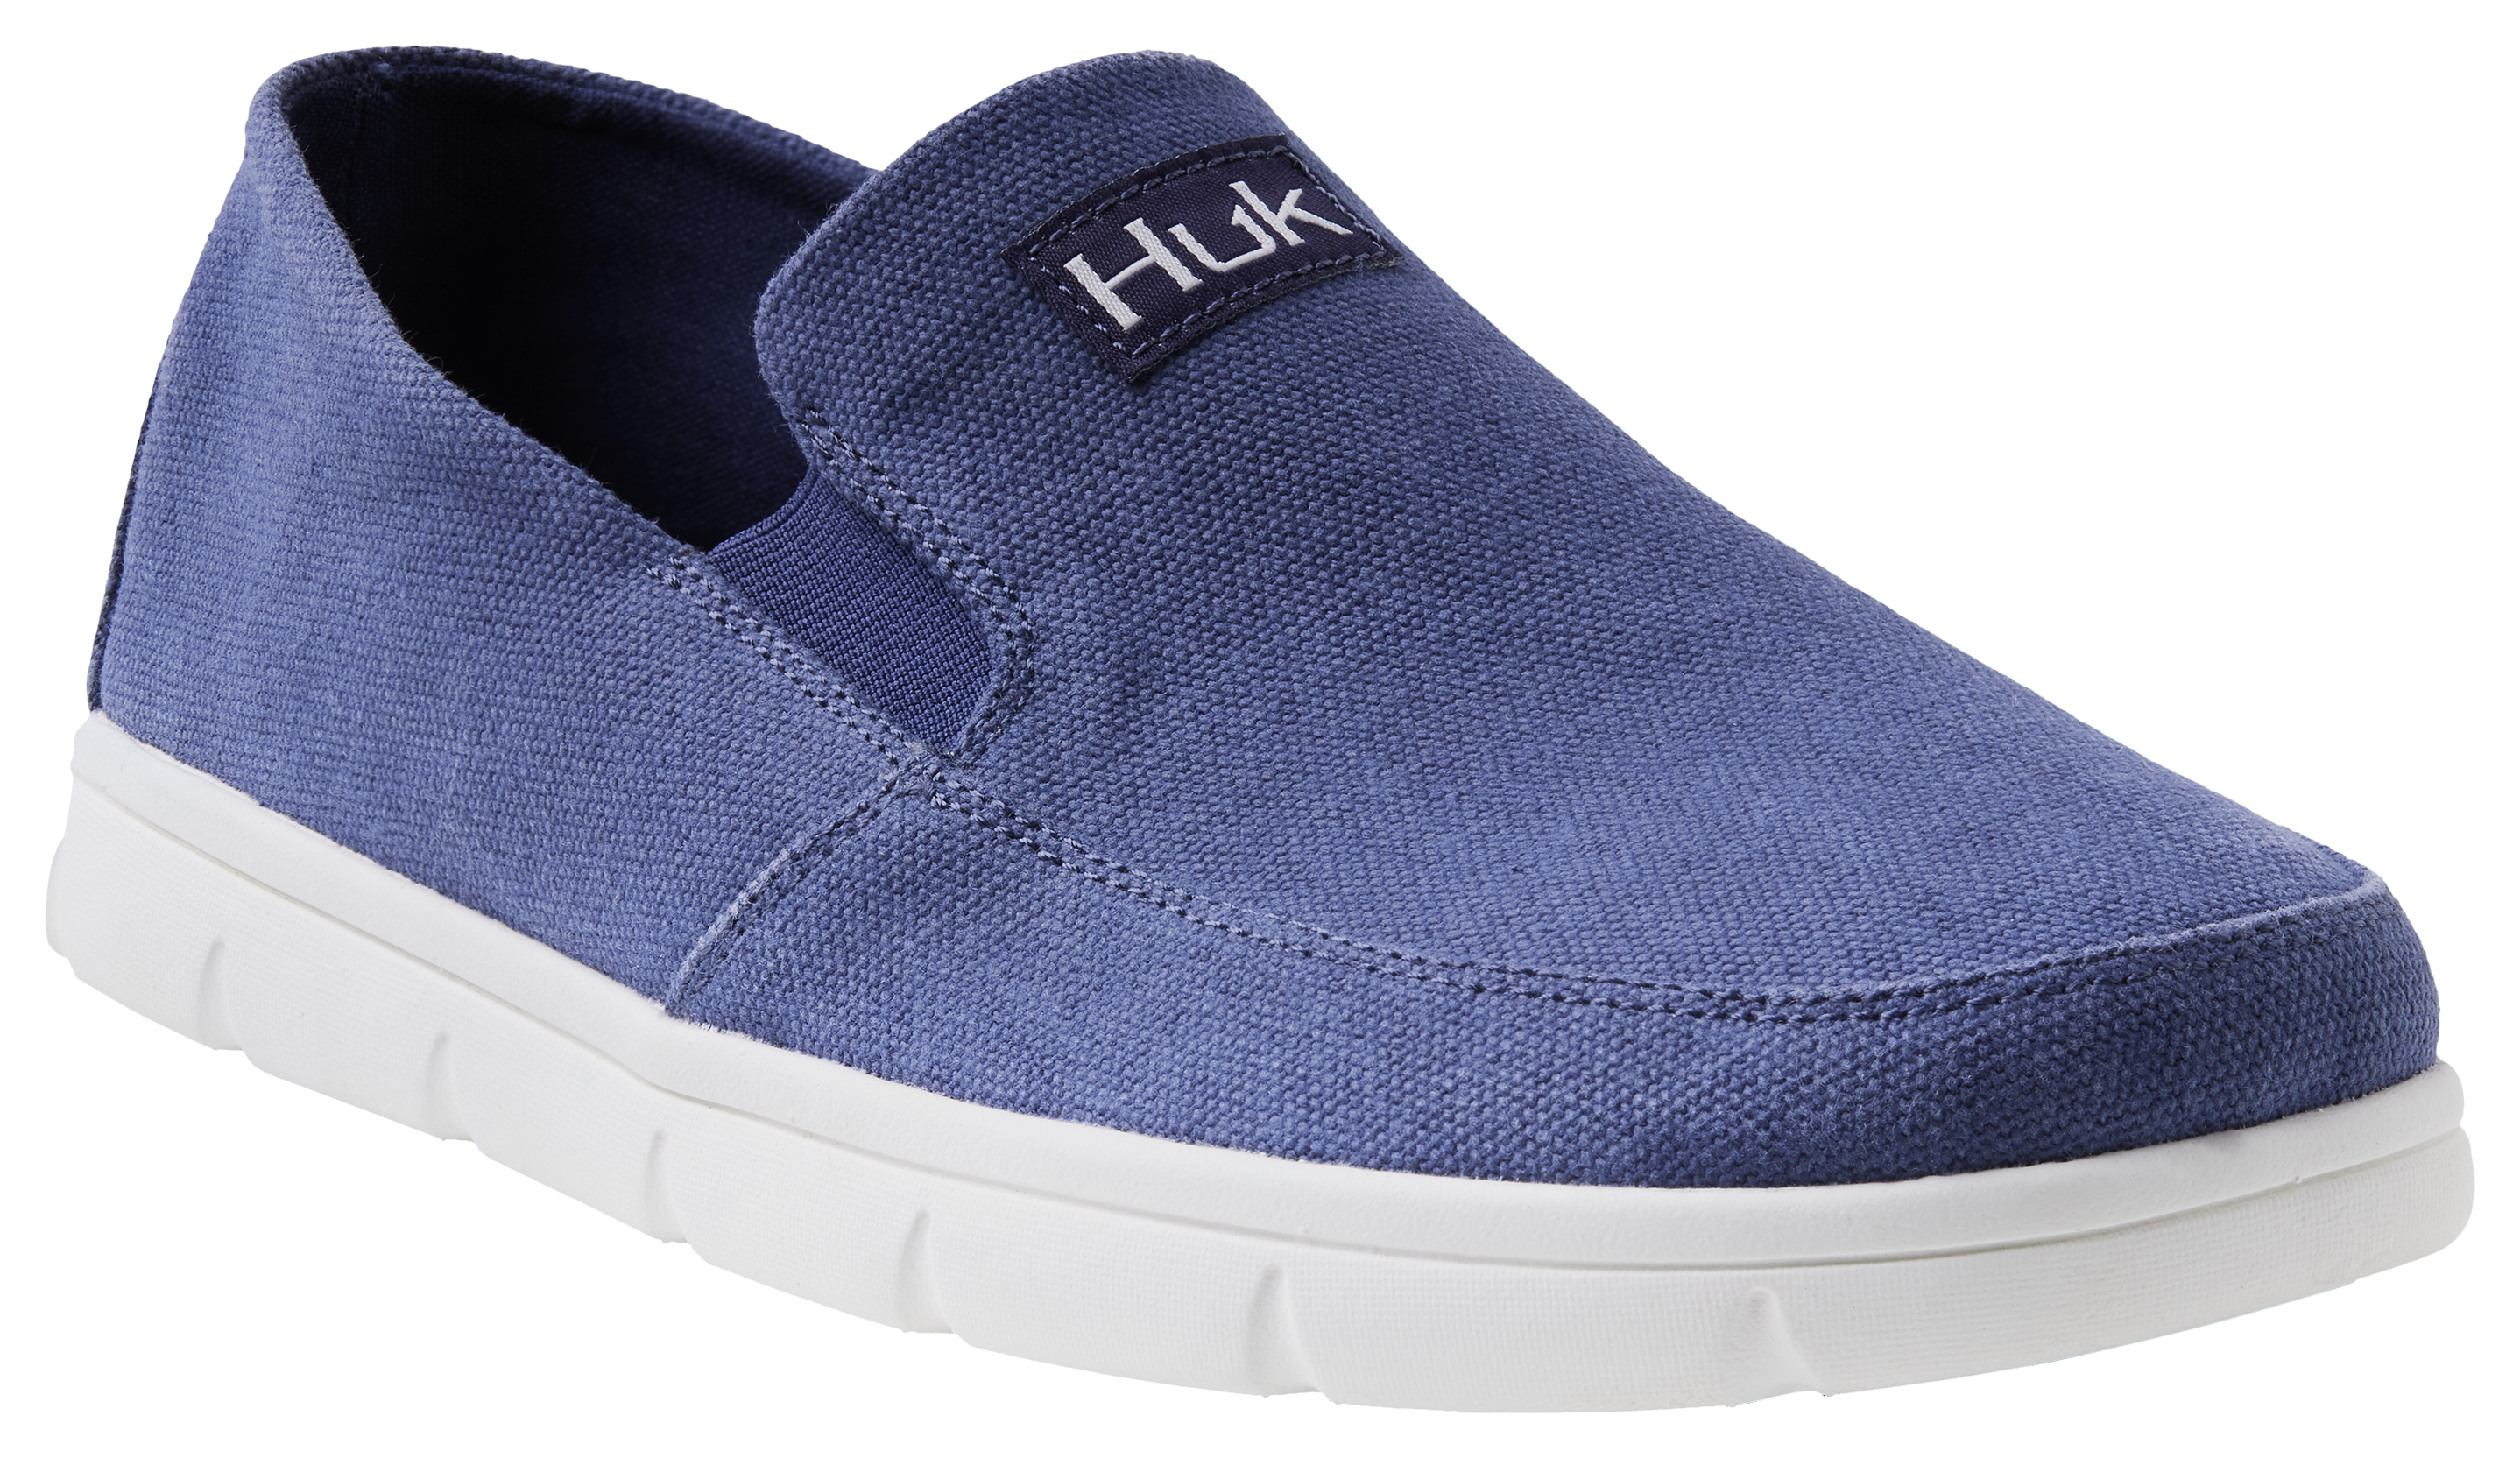 Huk Classic Brewster Casual Shoes for Men